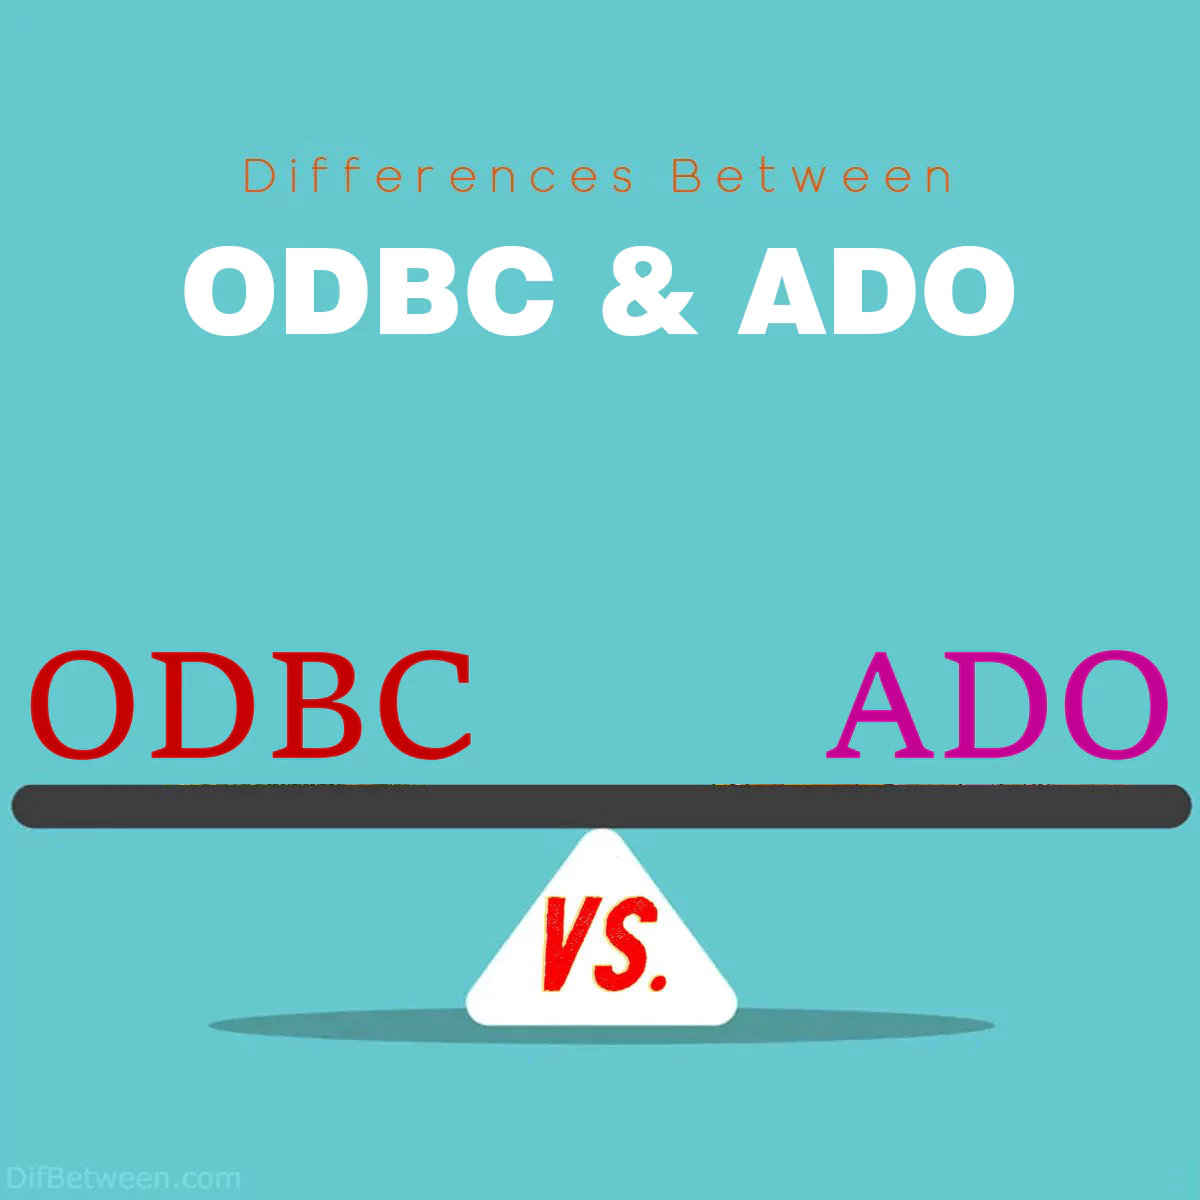 Differences Between ODBC and ADO